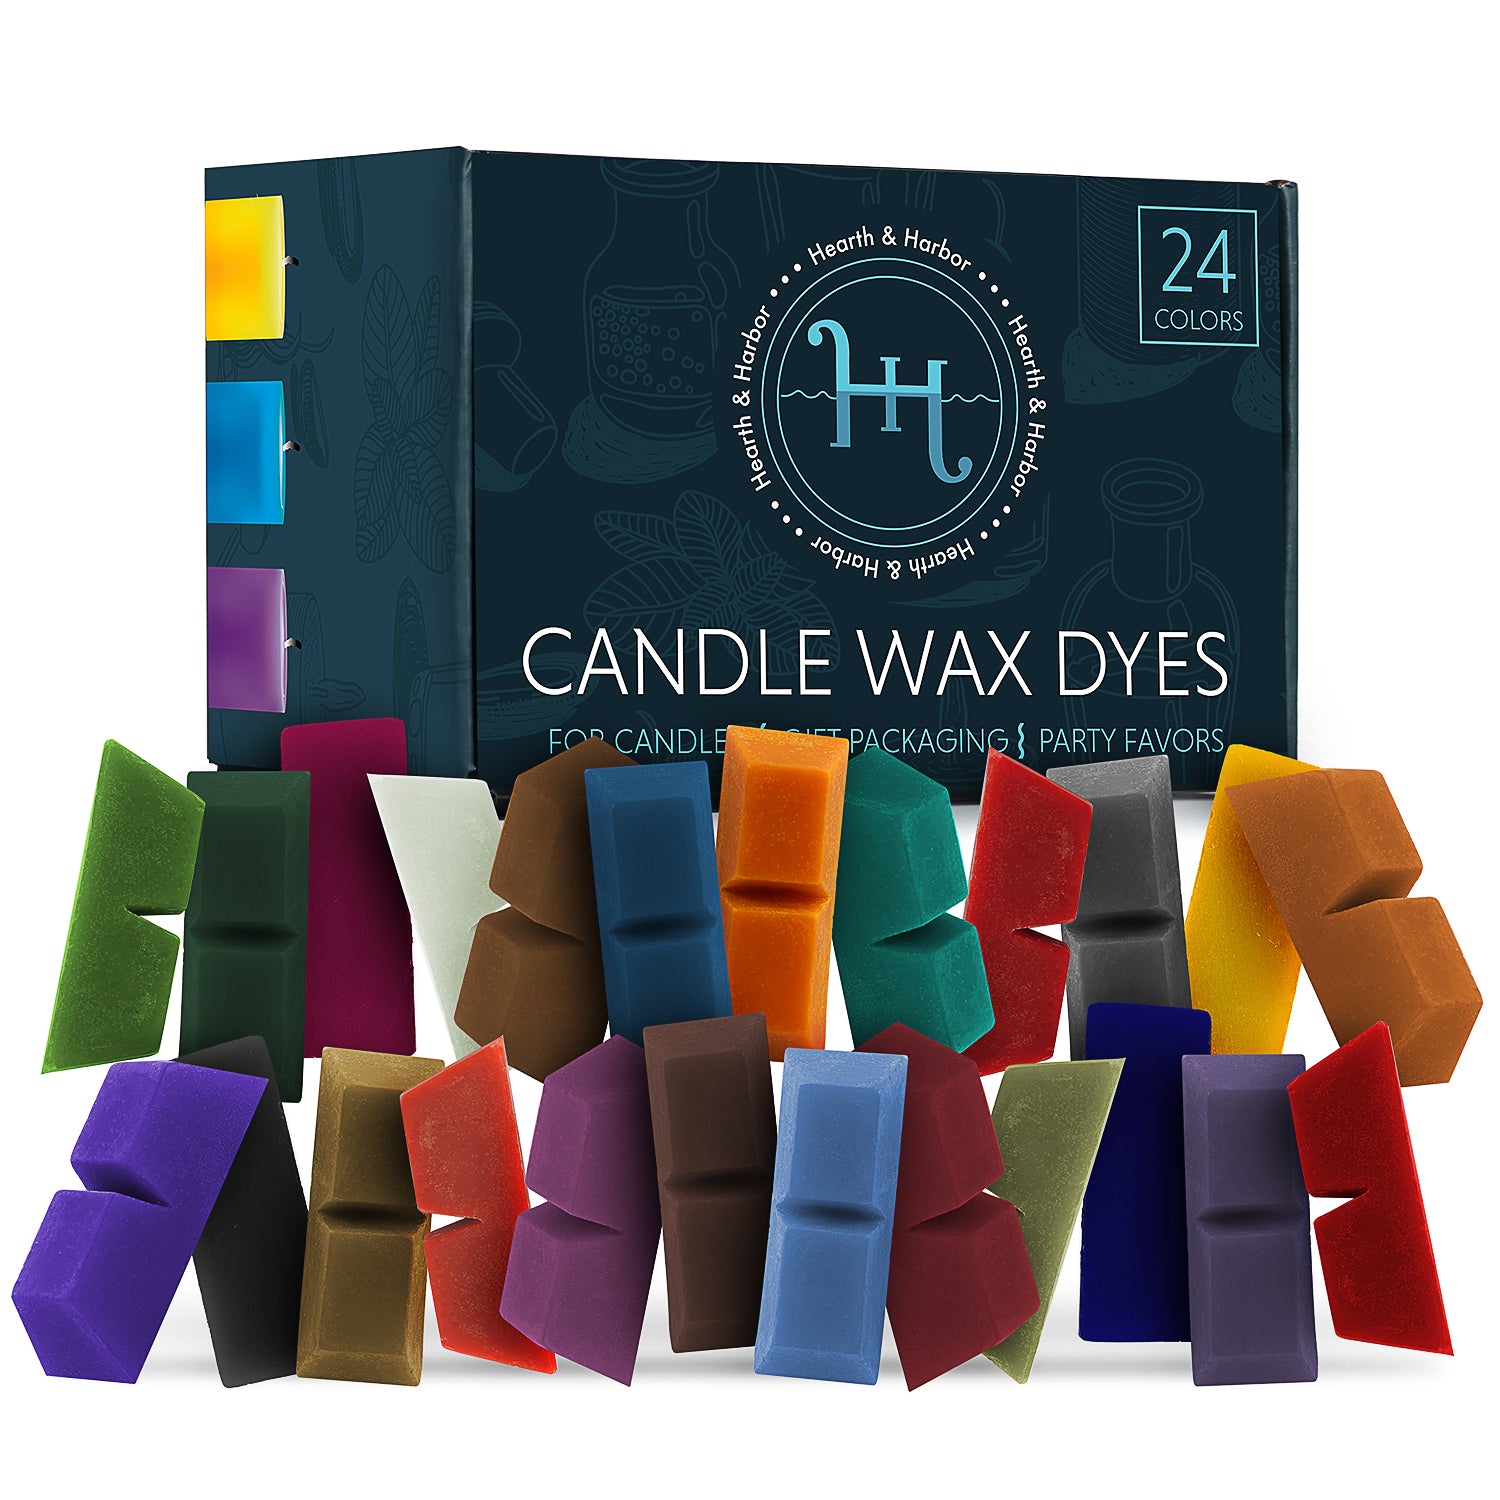 16 Candle Dye Set, Wax Dye Chips for Candle Making, Soy Candle Dye